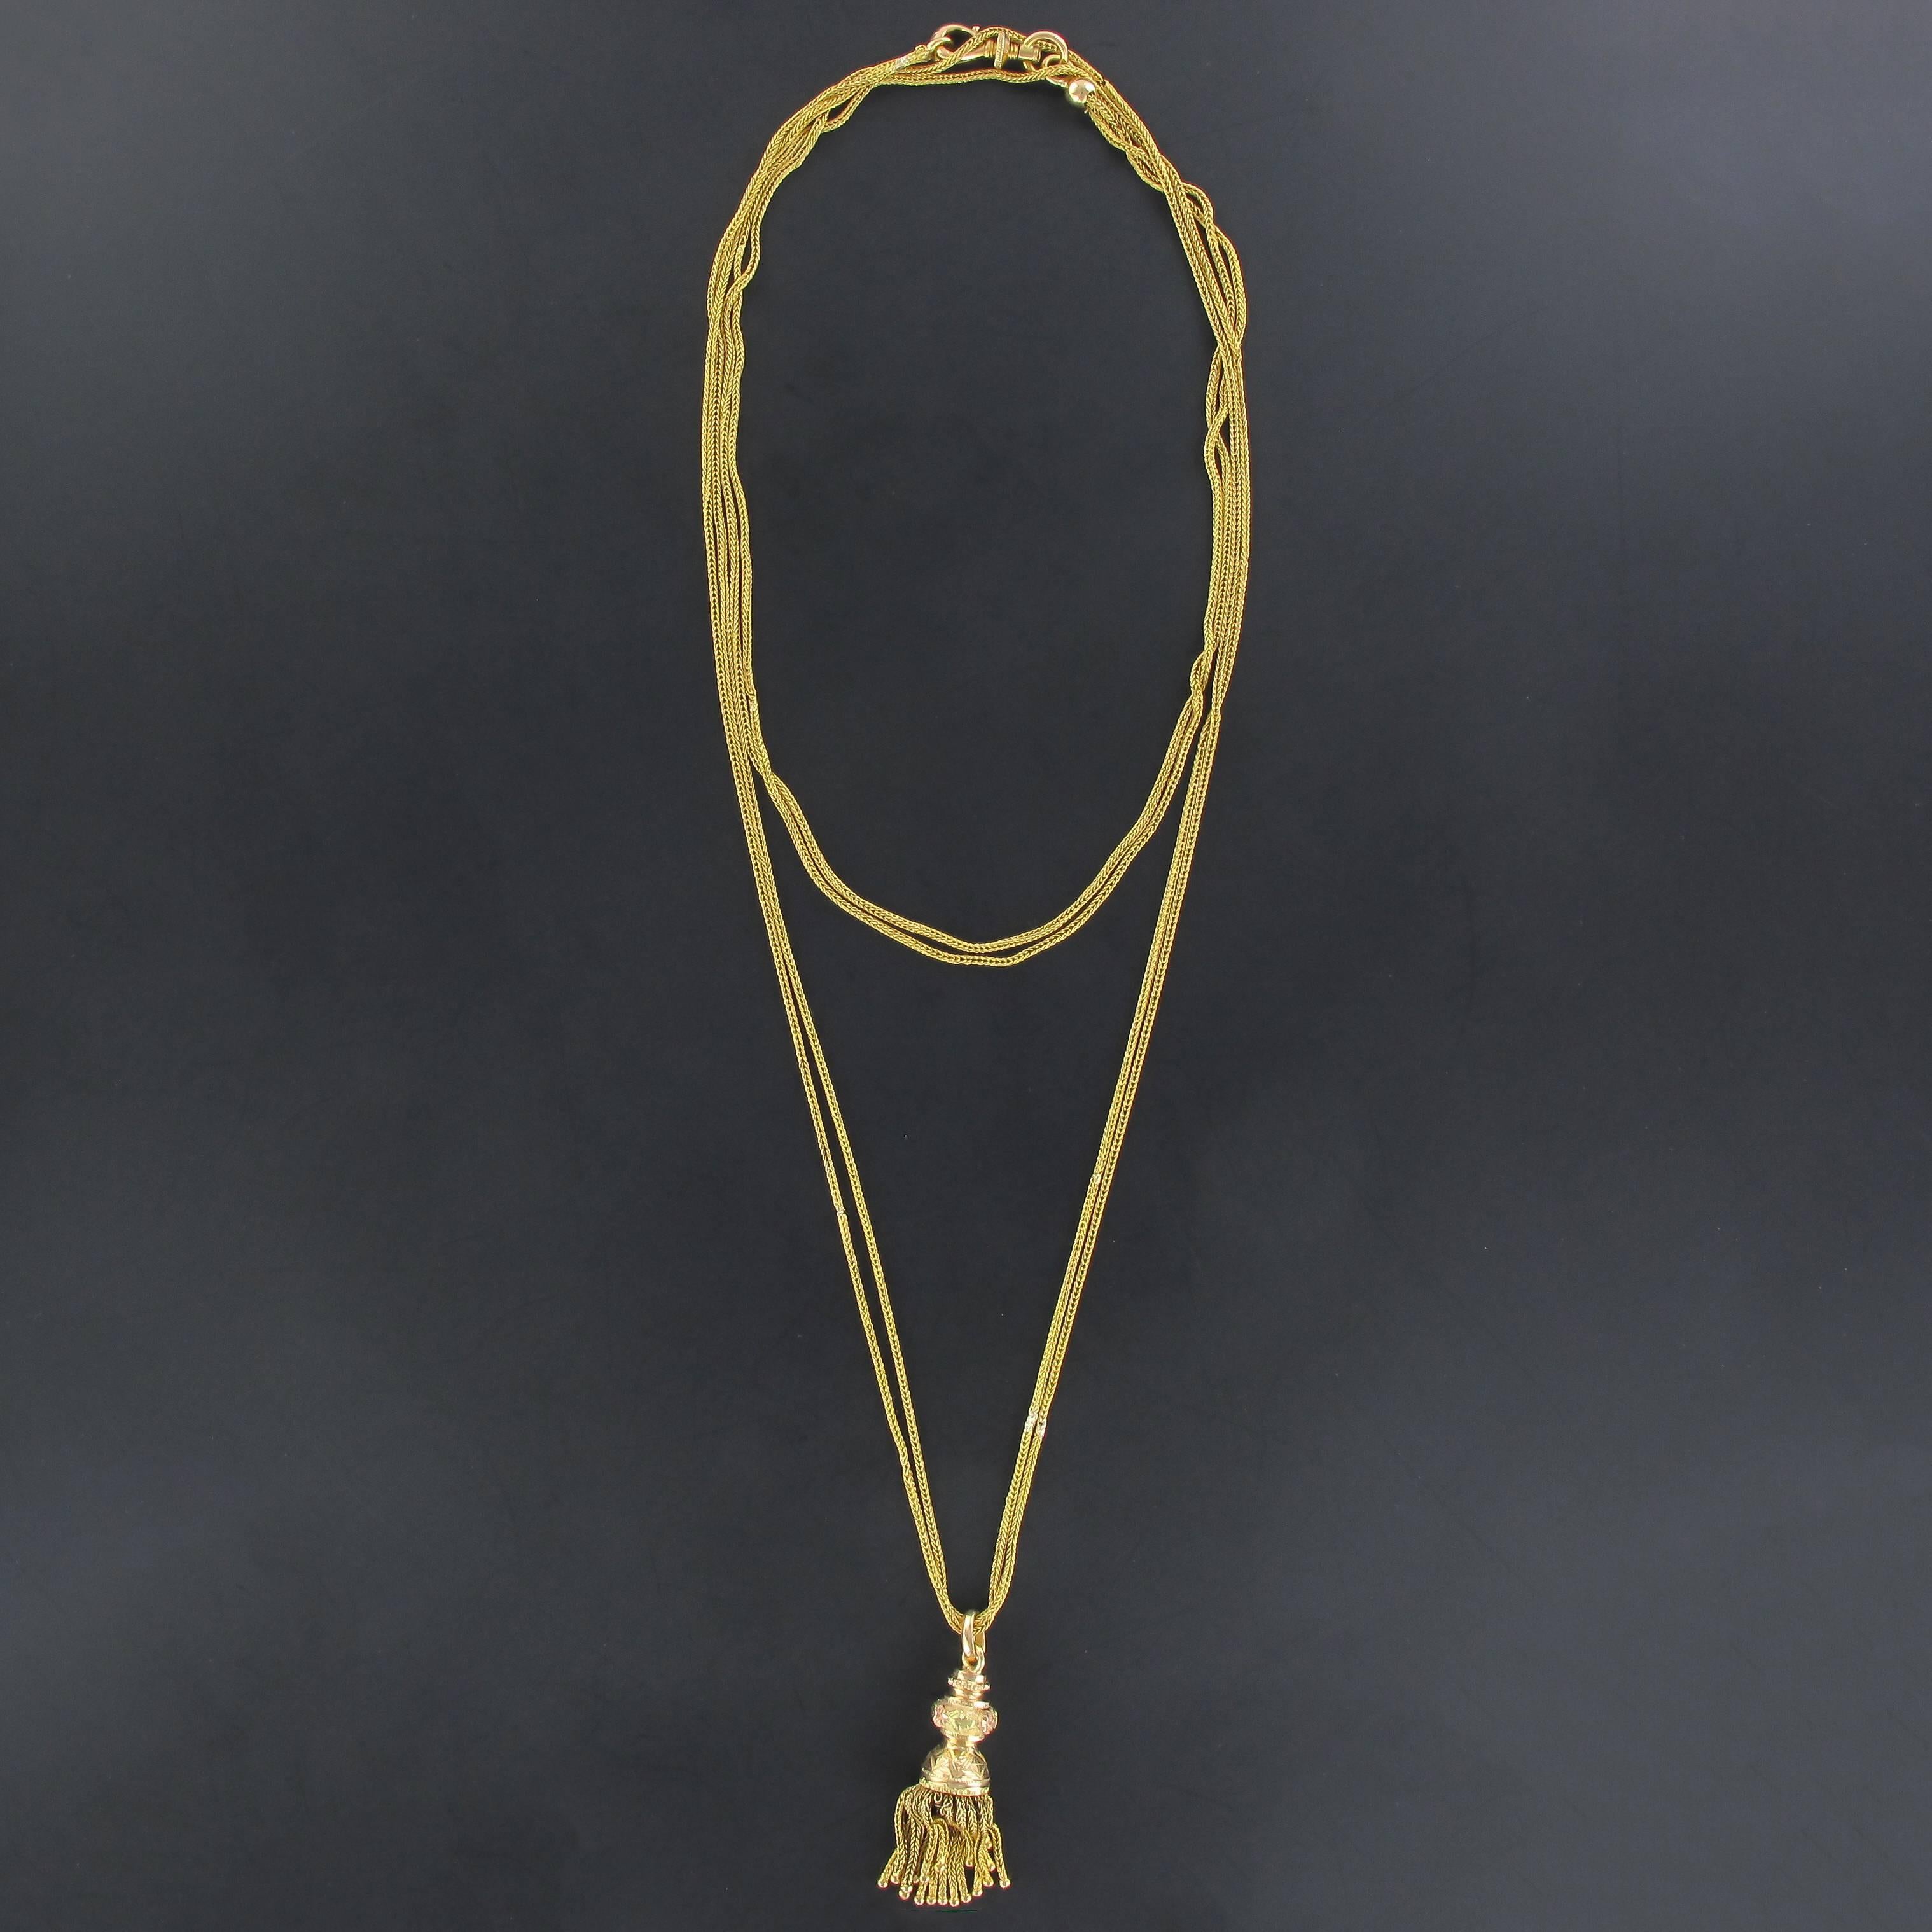 Women's French Napoleon III Antique Gold Chain Necklace with Pompom Pendant